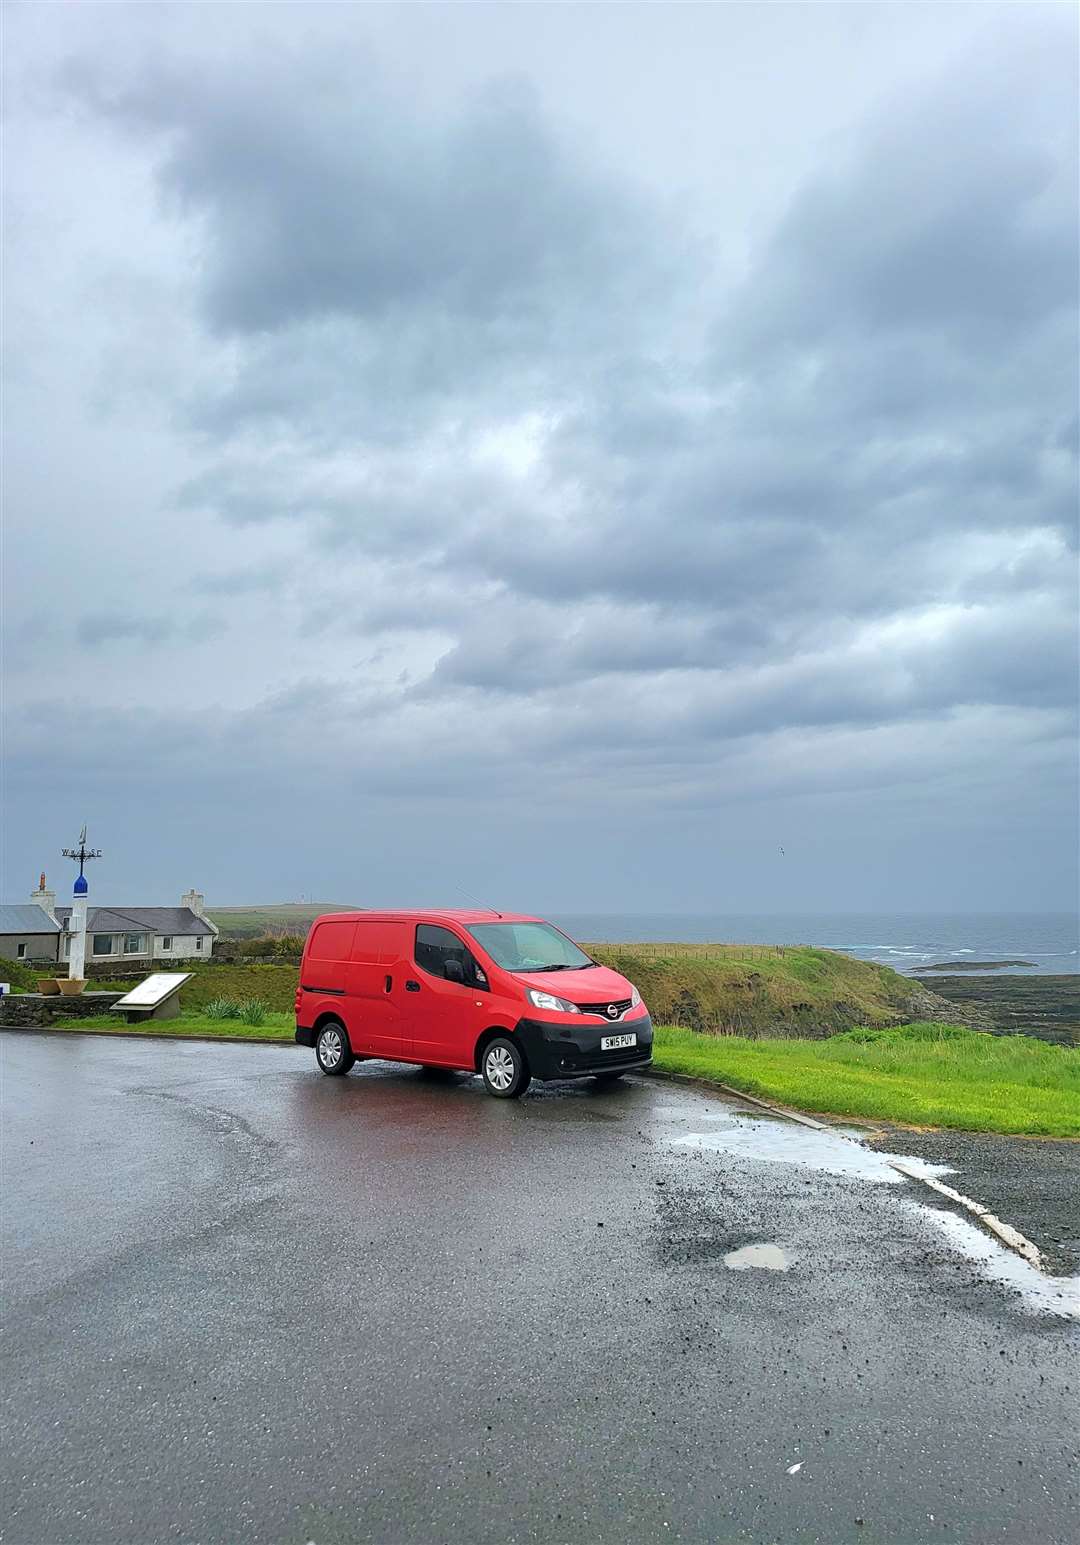 Look out for Shelagh's little red van will be at Staxigoe tomorrow.